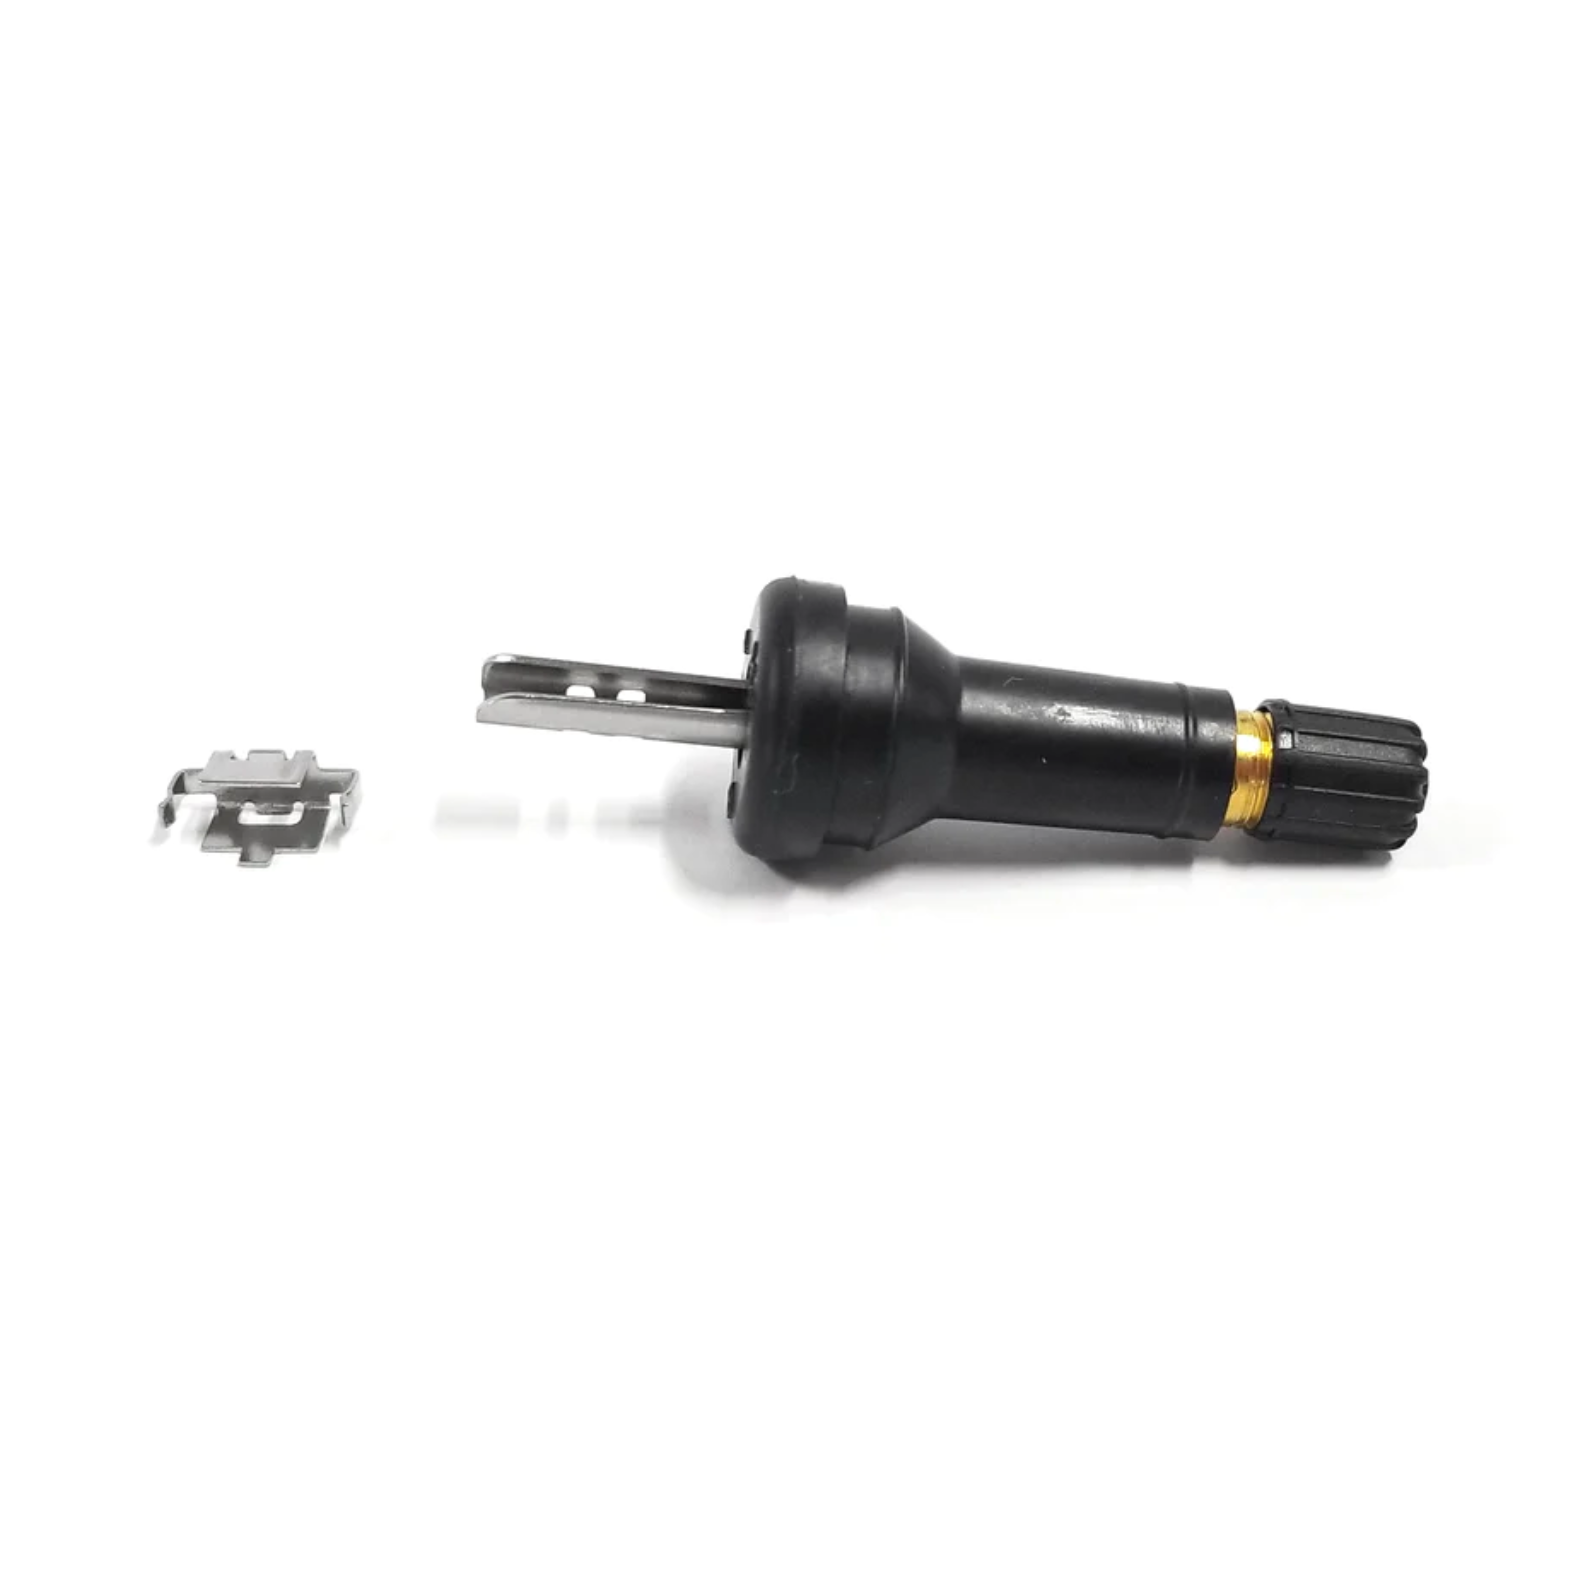 Rubber Snap-in Valve Stems For Nissan TPMS Sensors, Includes Locking Clip | VS-30